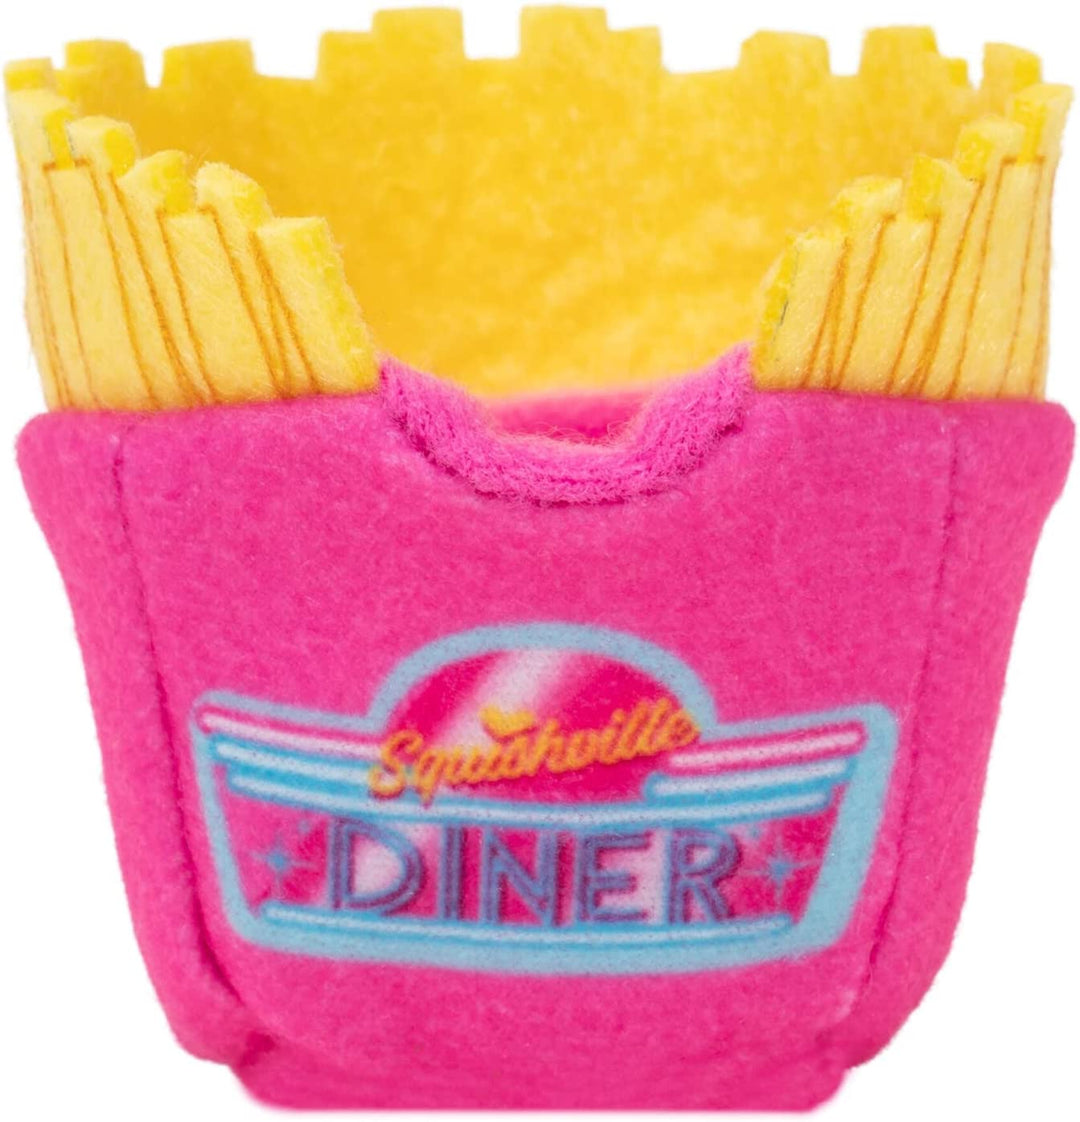 Squishville SQM0323 Deluxe Diner Playscene-Include 2-Inch Plush Accessories-Toys